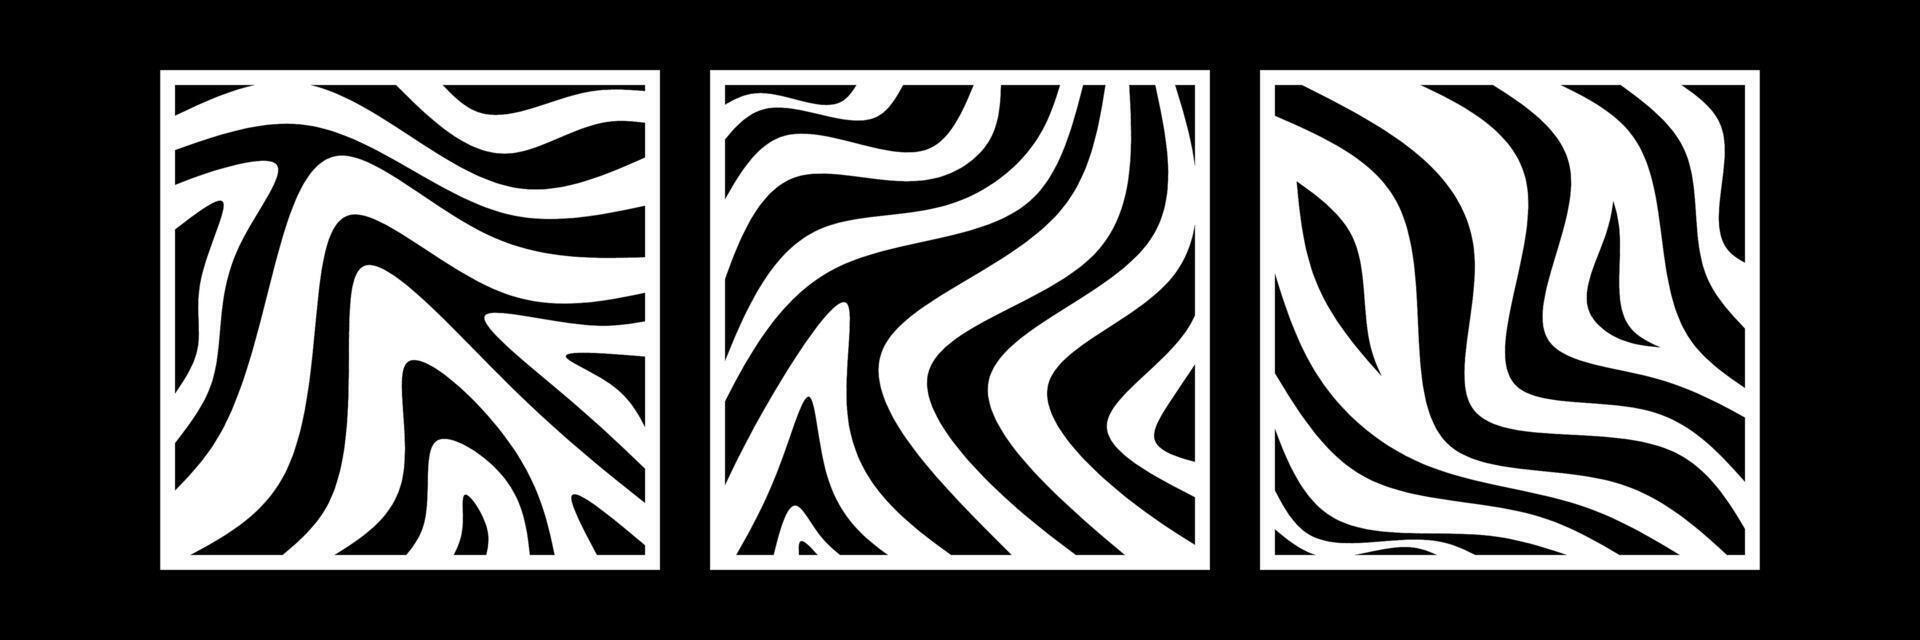 swirl patterns for decorations, background, and cnc cutting vector